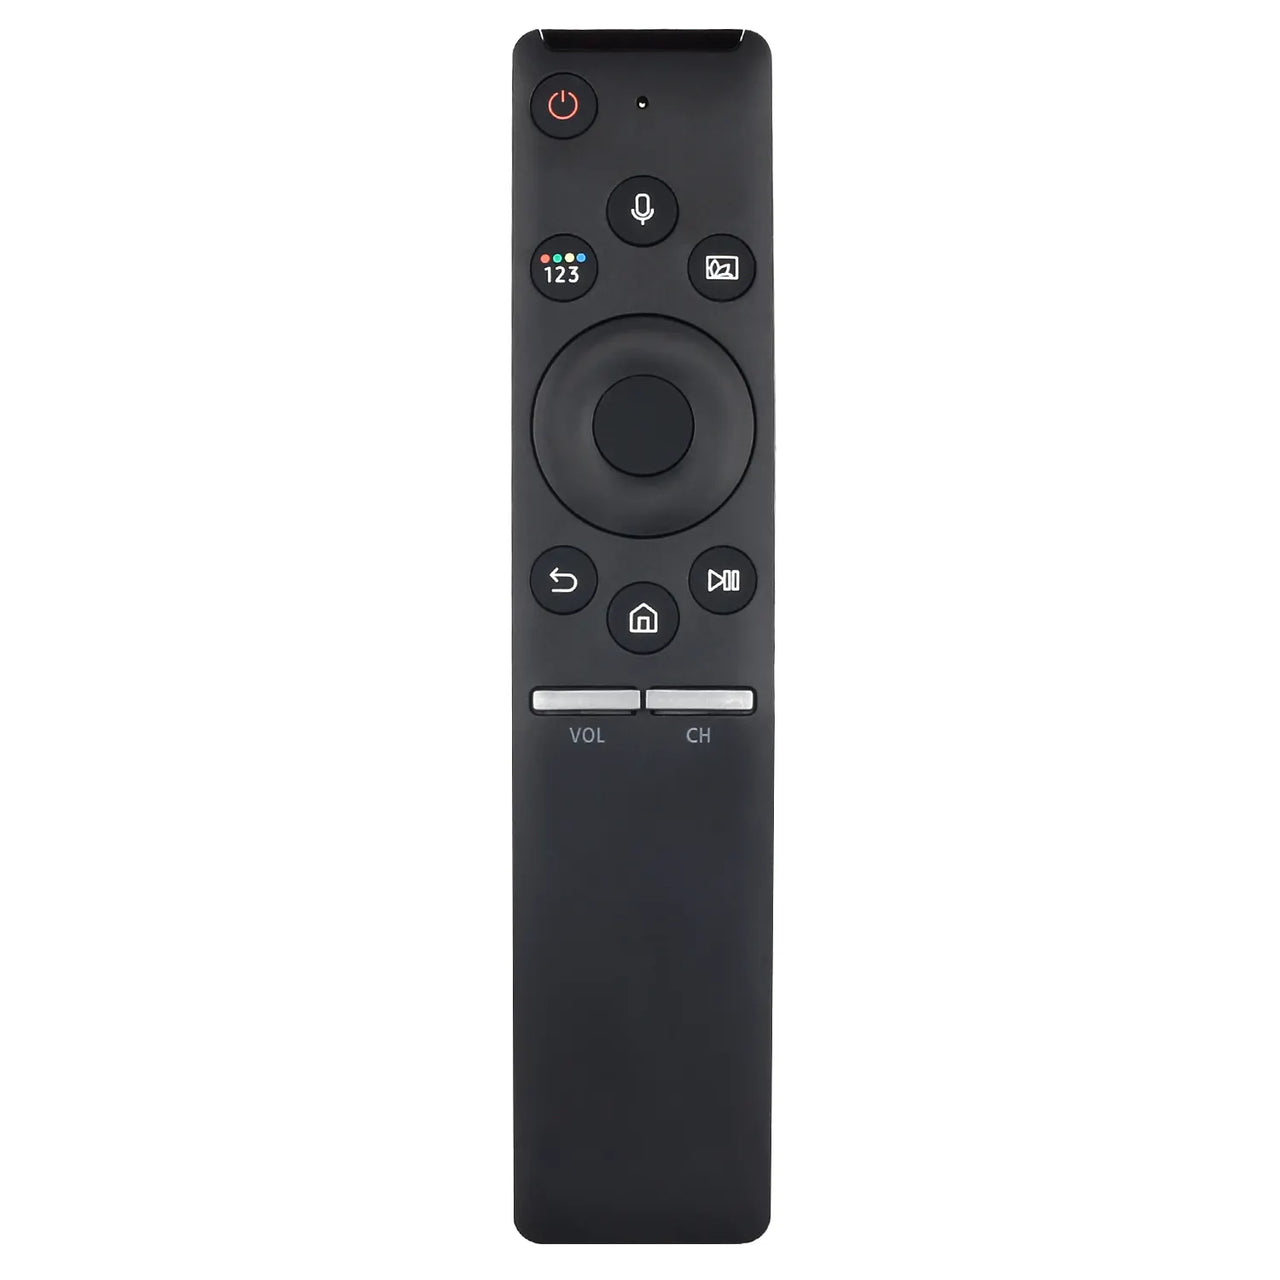 BN59-01298G Replacement Remote with Voice for Samsung Televisions